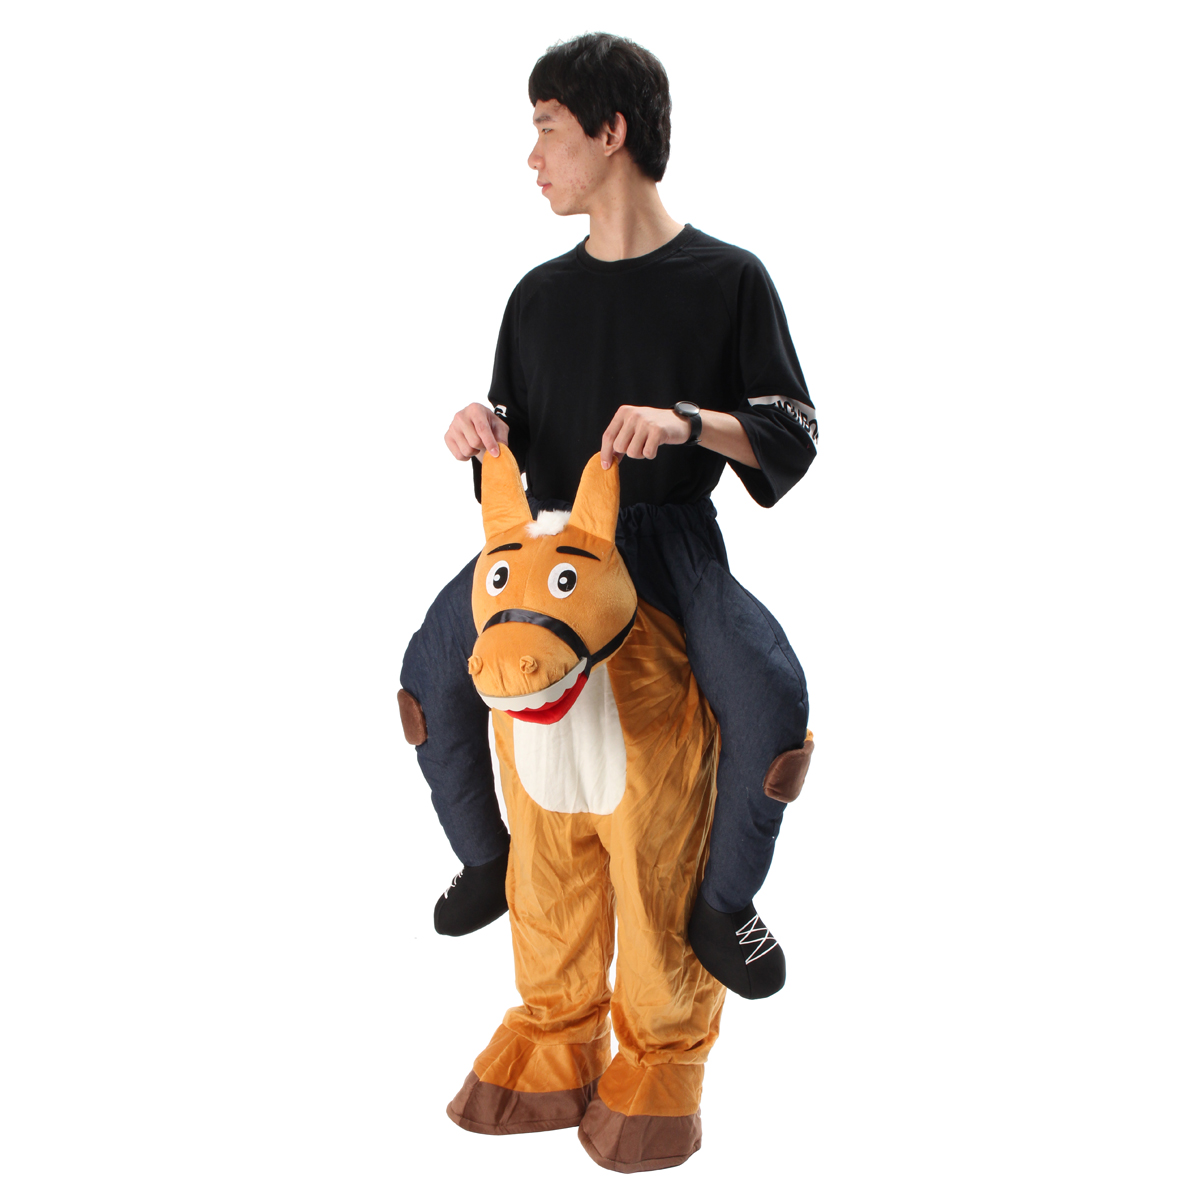 Hallowen-Christmas-Shoulder-Carry-Me-Piggy-Back-Ride-On-Fancy-Dress-Adult-Party-Costume-Outfit-1204091-12